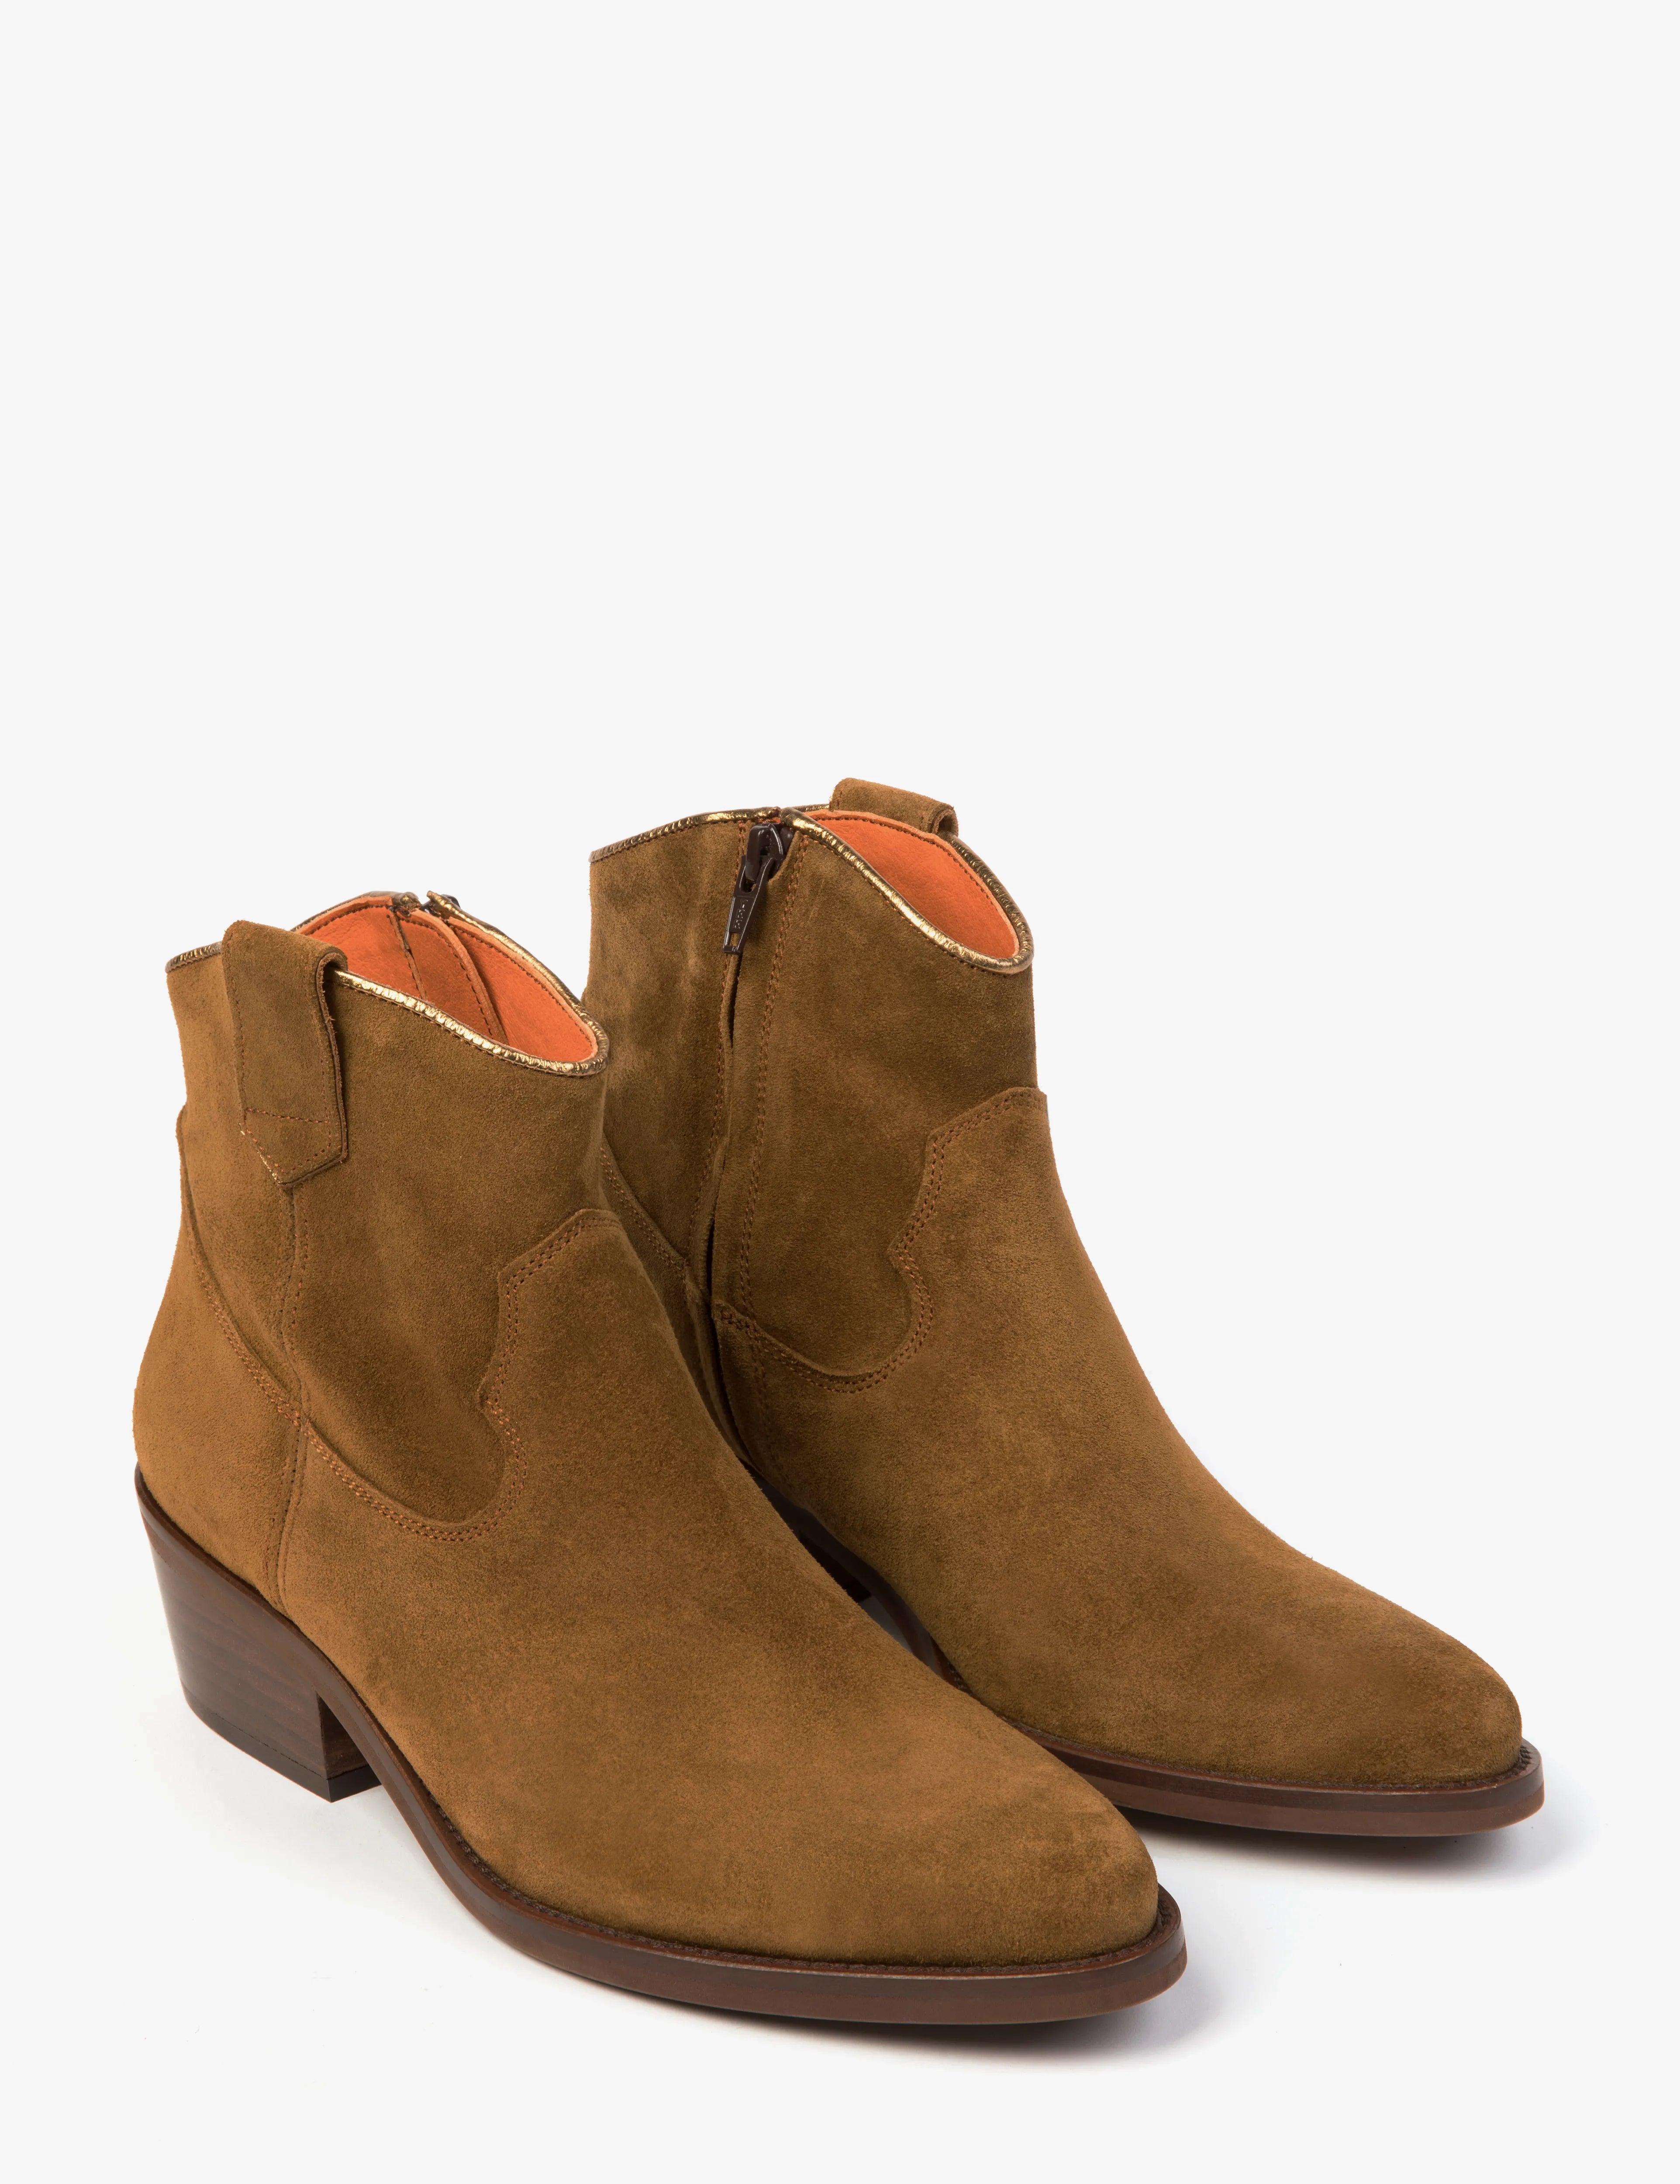 Cassidy Suede Boot - Tan